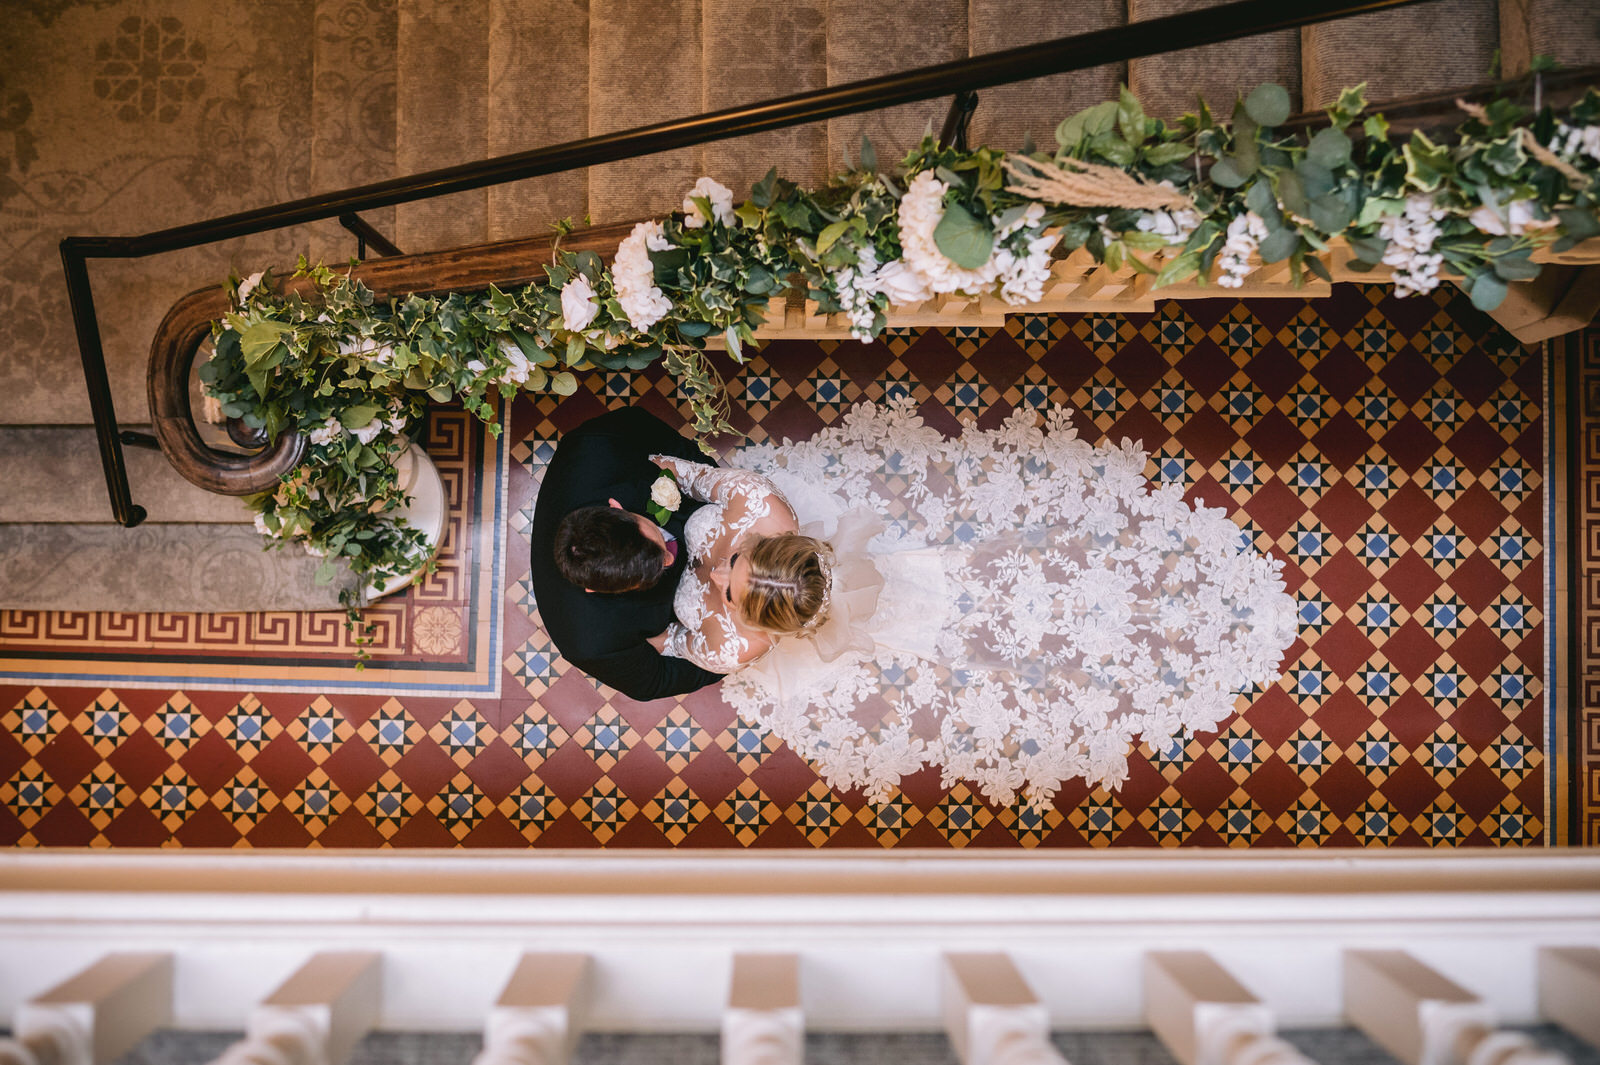 Photograph of Bride & Groom from top of stairs at Old Palace Chester wedding